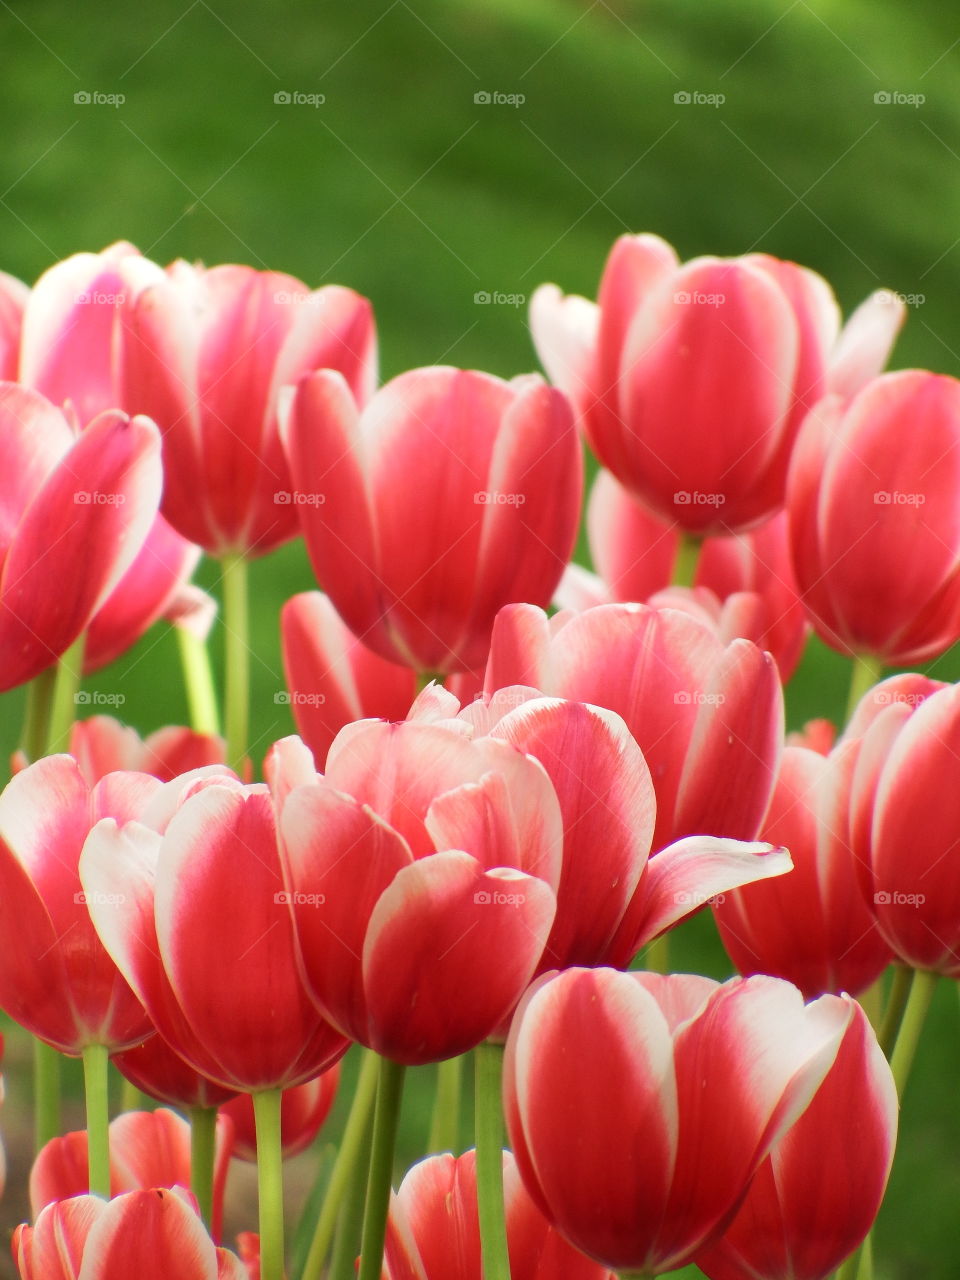 A bunch of red and white tulips.
